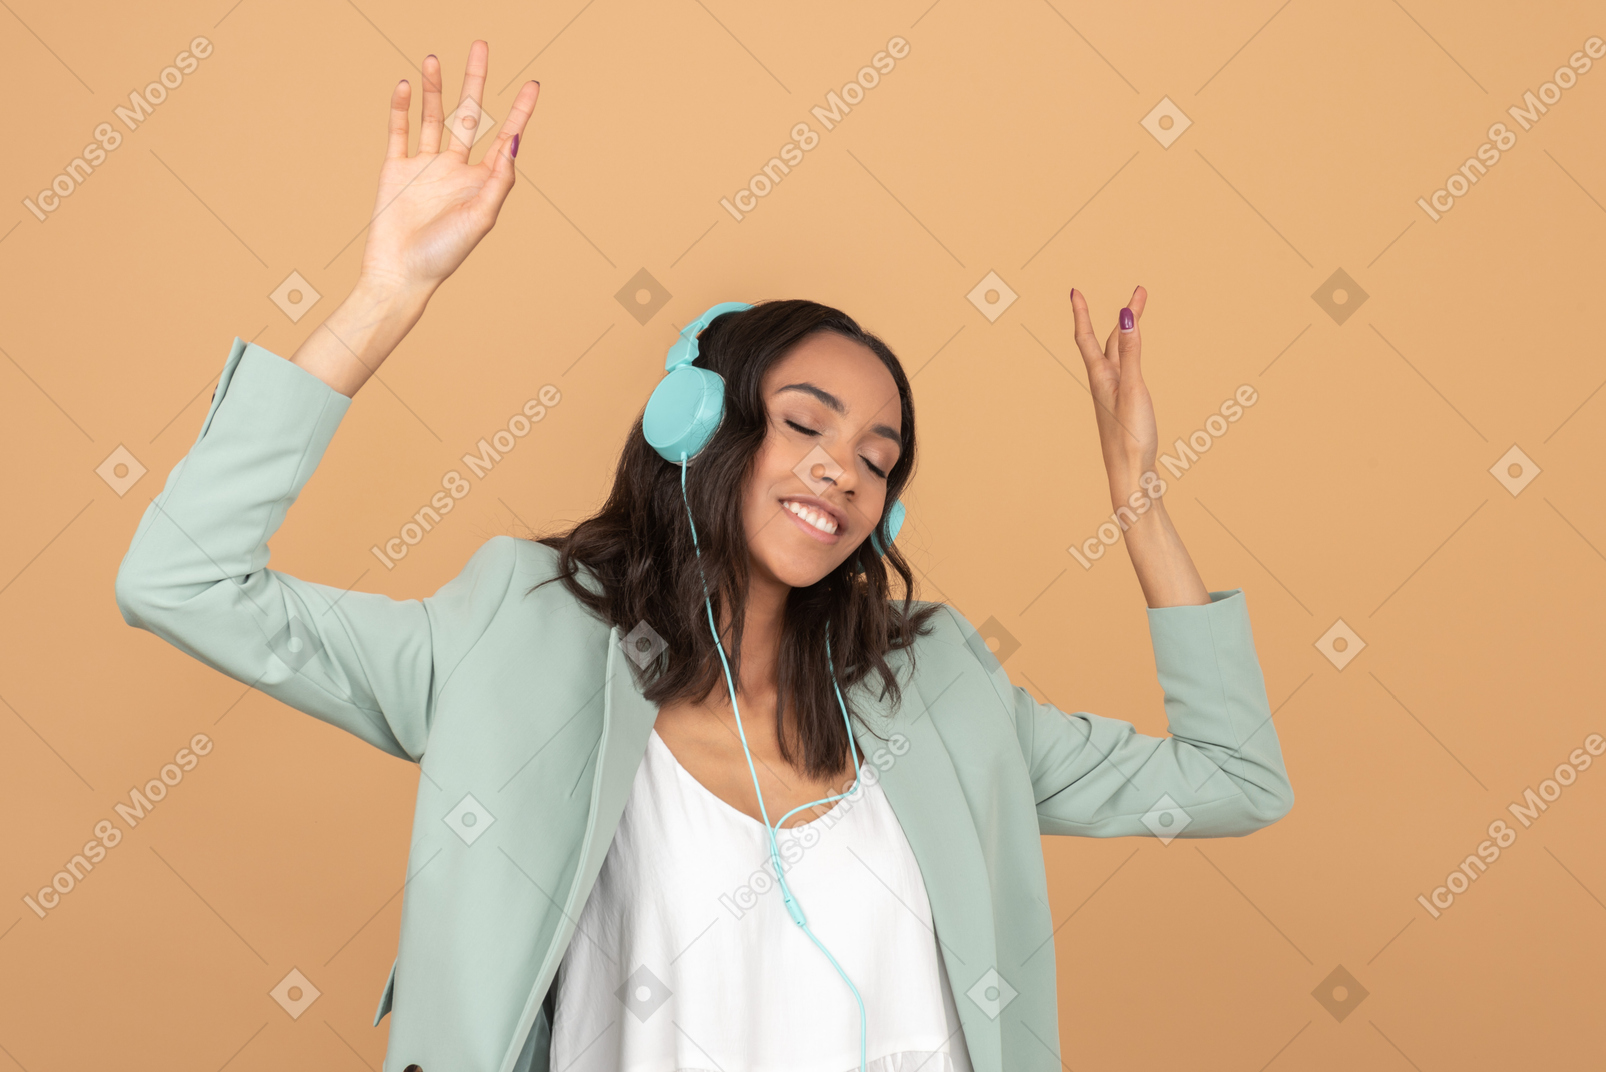 Attractive young girl listening to music in headphones and holding her hands up